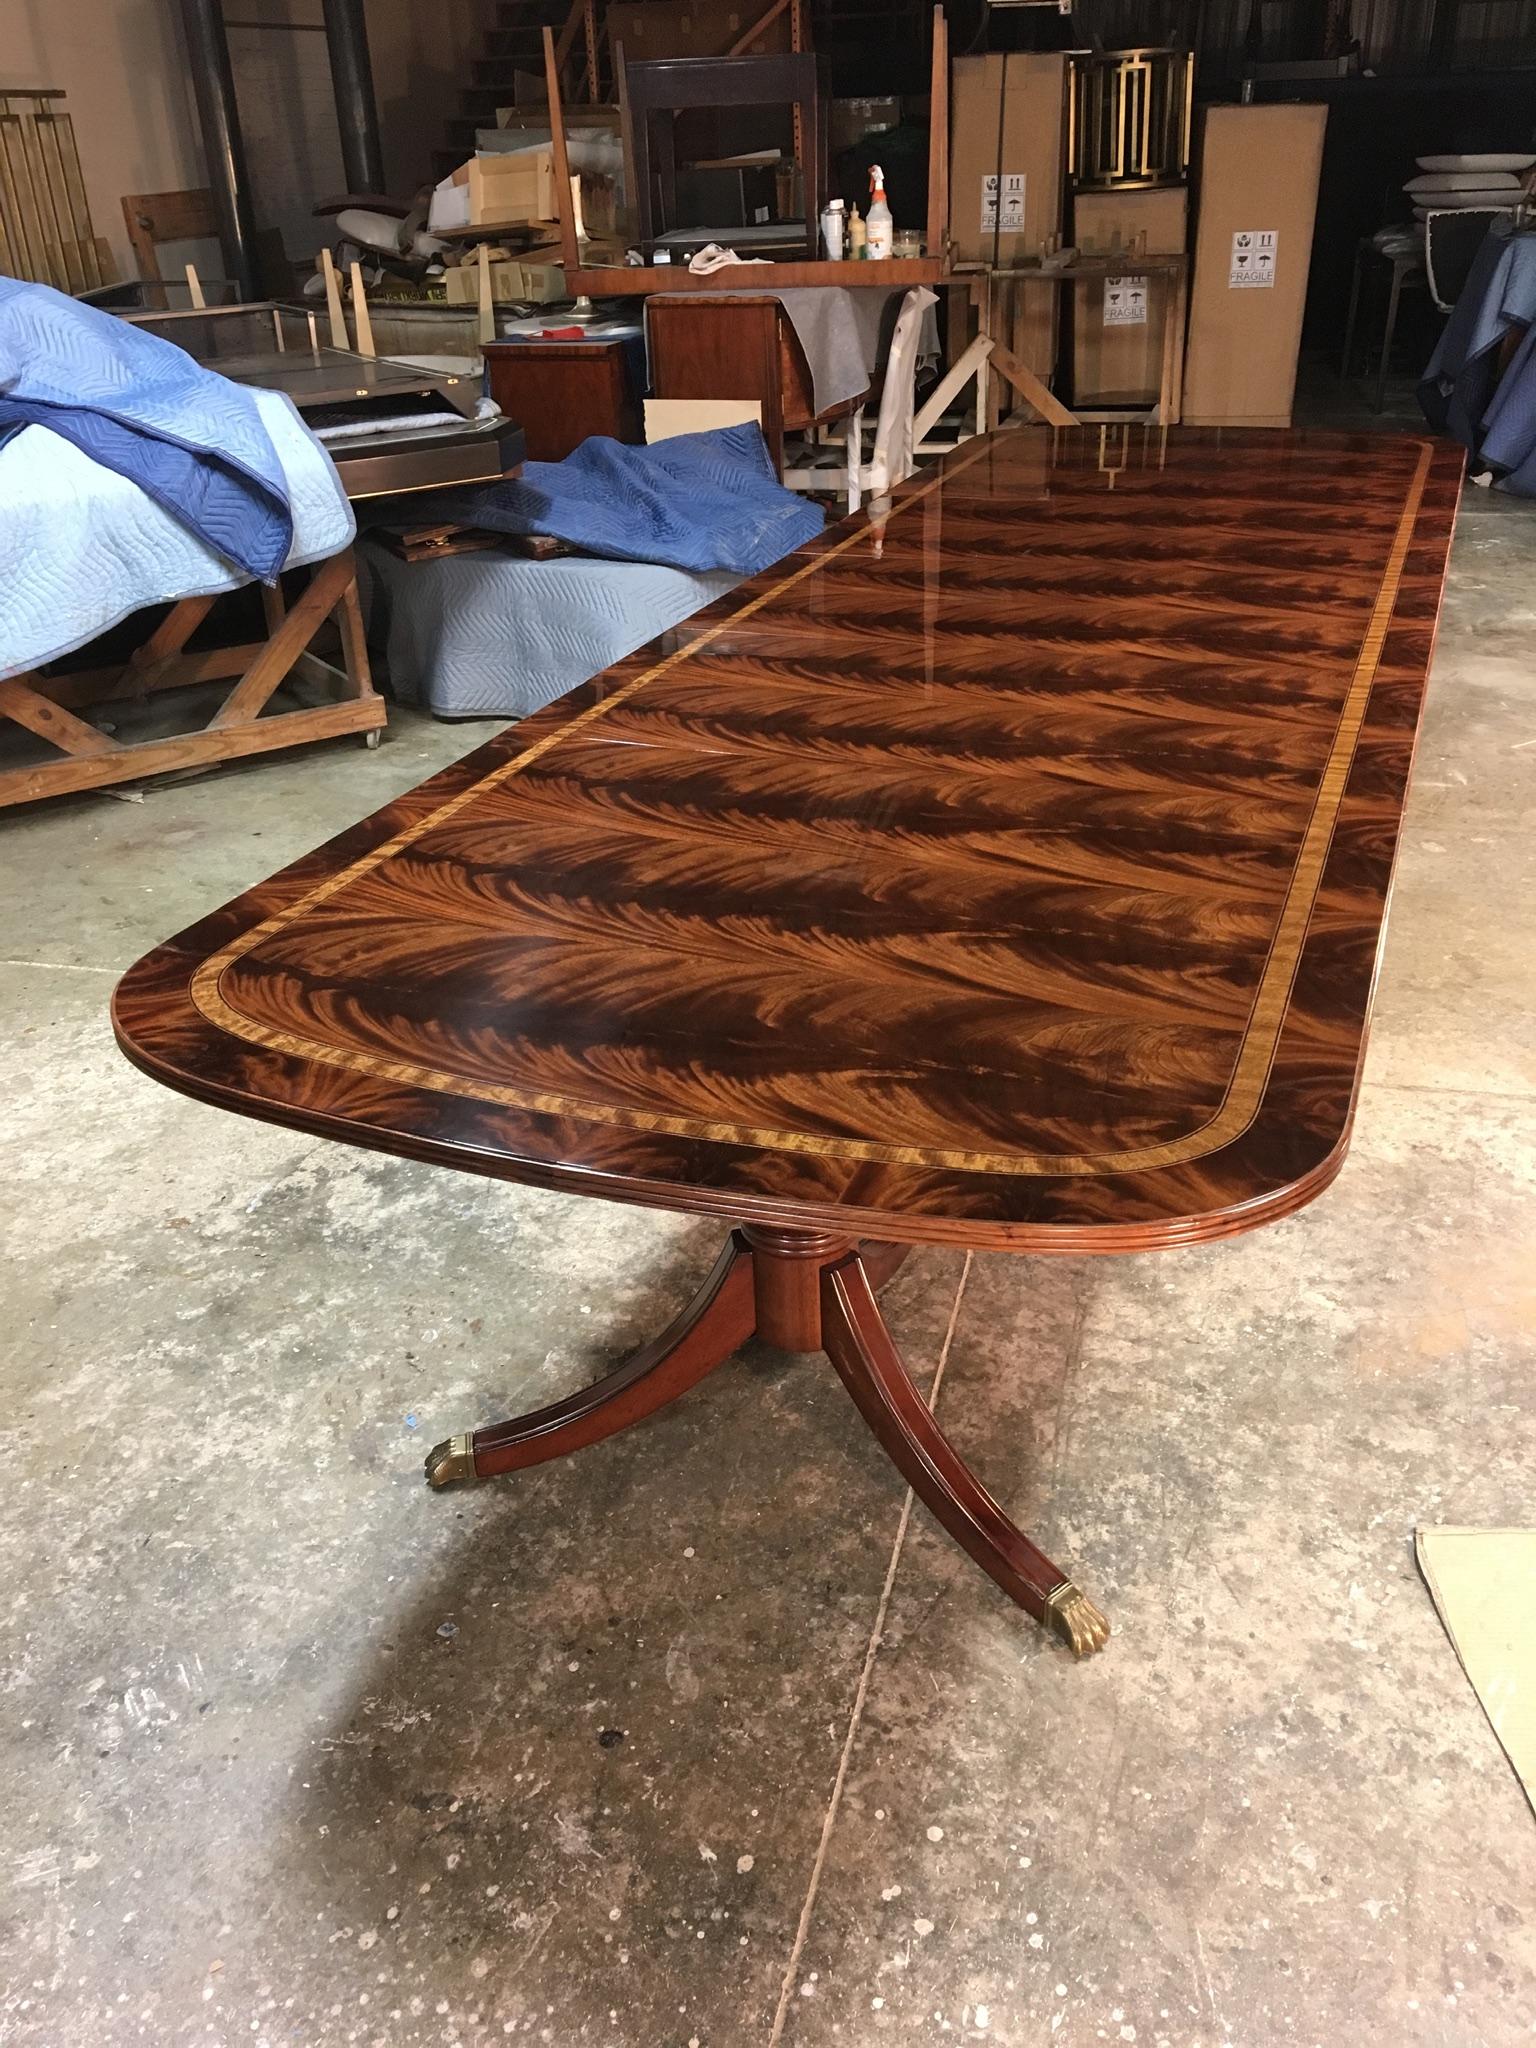 This is a made-to-order Large Traditional mahogany banquet/dining table made in the Leighton Hall shop. It features a field of slip-matched swirly crotch mahogany from west Africa with a satinwood inlay and a crotch mahogany border. It has a hand